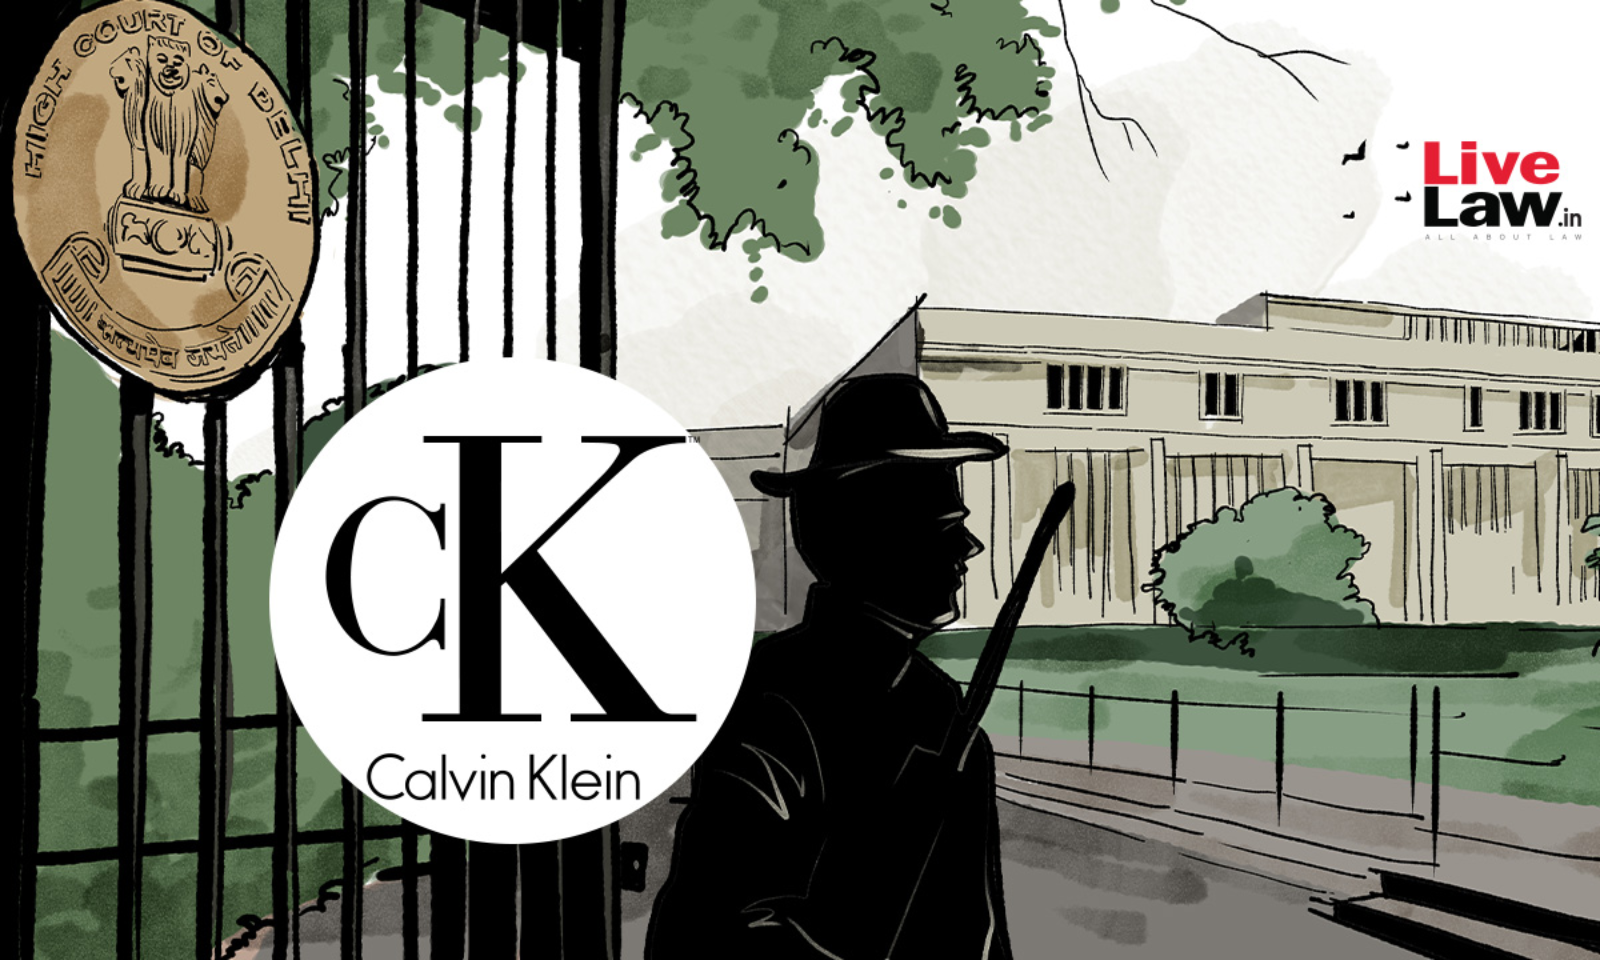 Trademark Infringement: Delhi High Court Restrains Two Websites From  Selling Testers Of Calvin Klein Perfumes